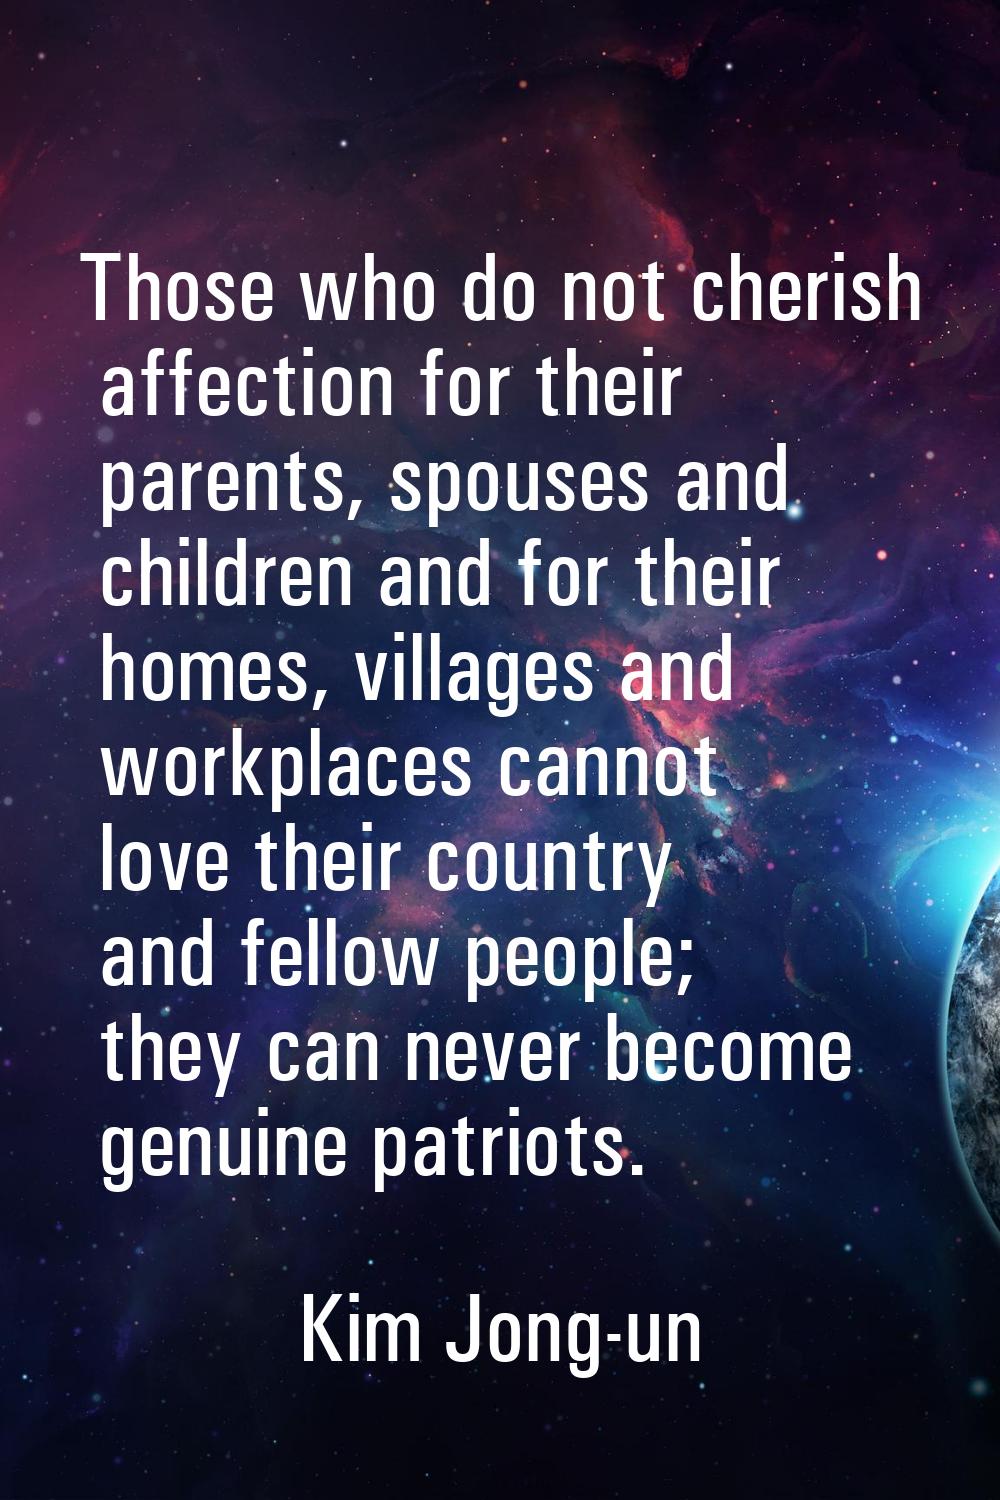 Those who do not cherish affection for their parents, spouses and children and for their homes, vil